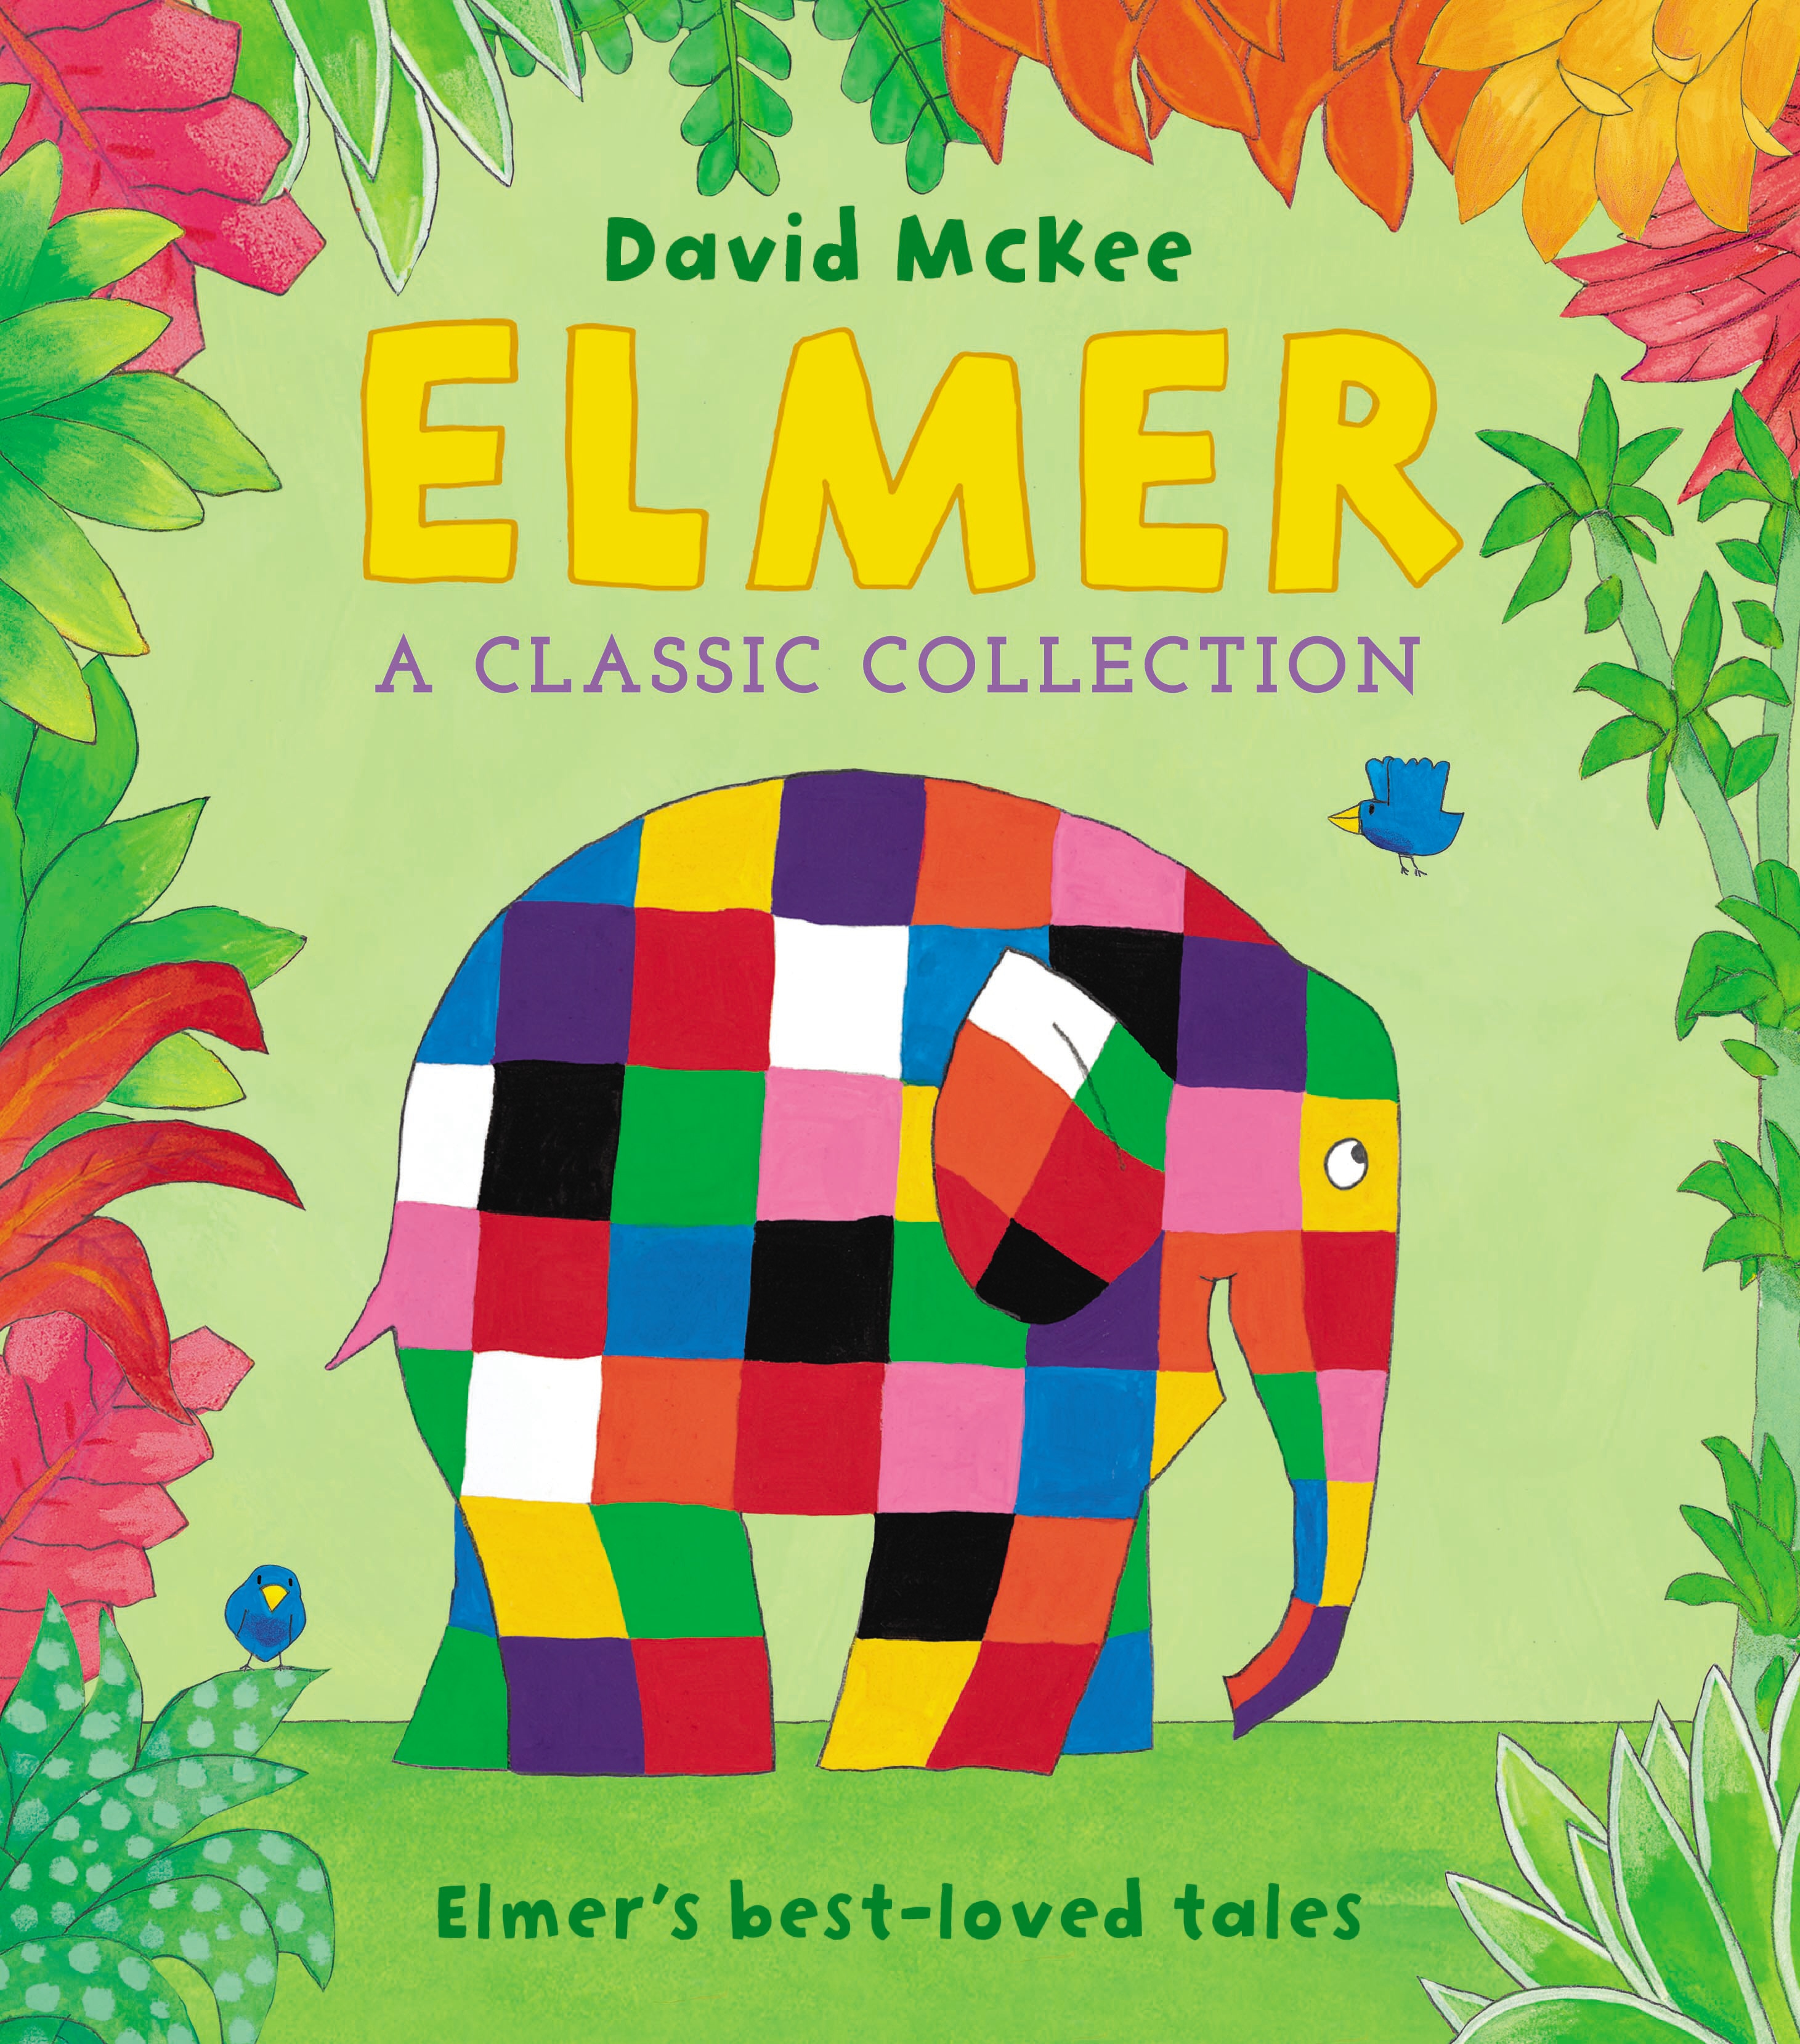 Book “Elmer: A Classic Collection” by David McKee — September 5, 2019